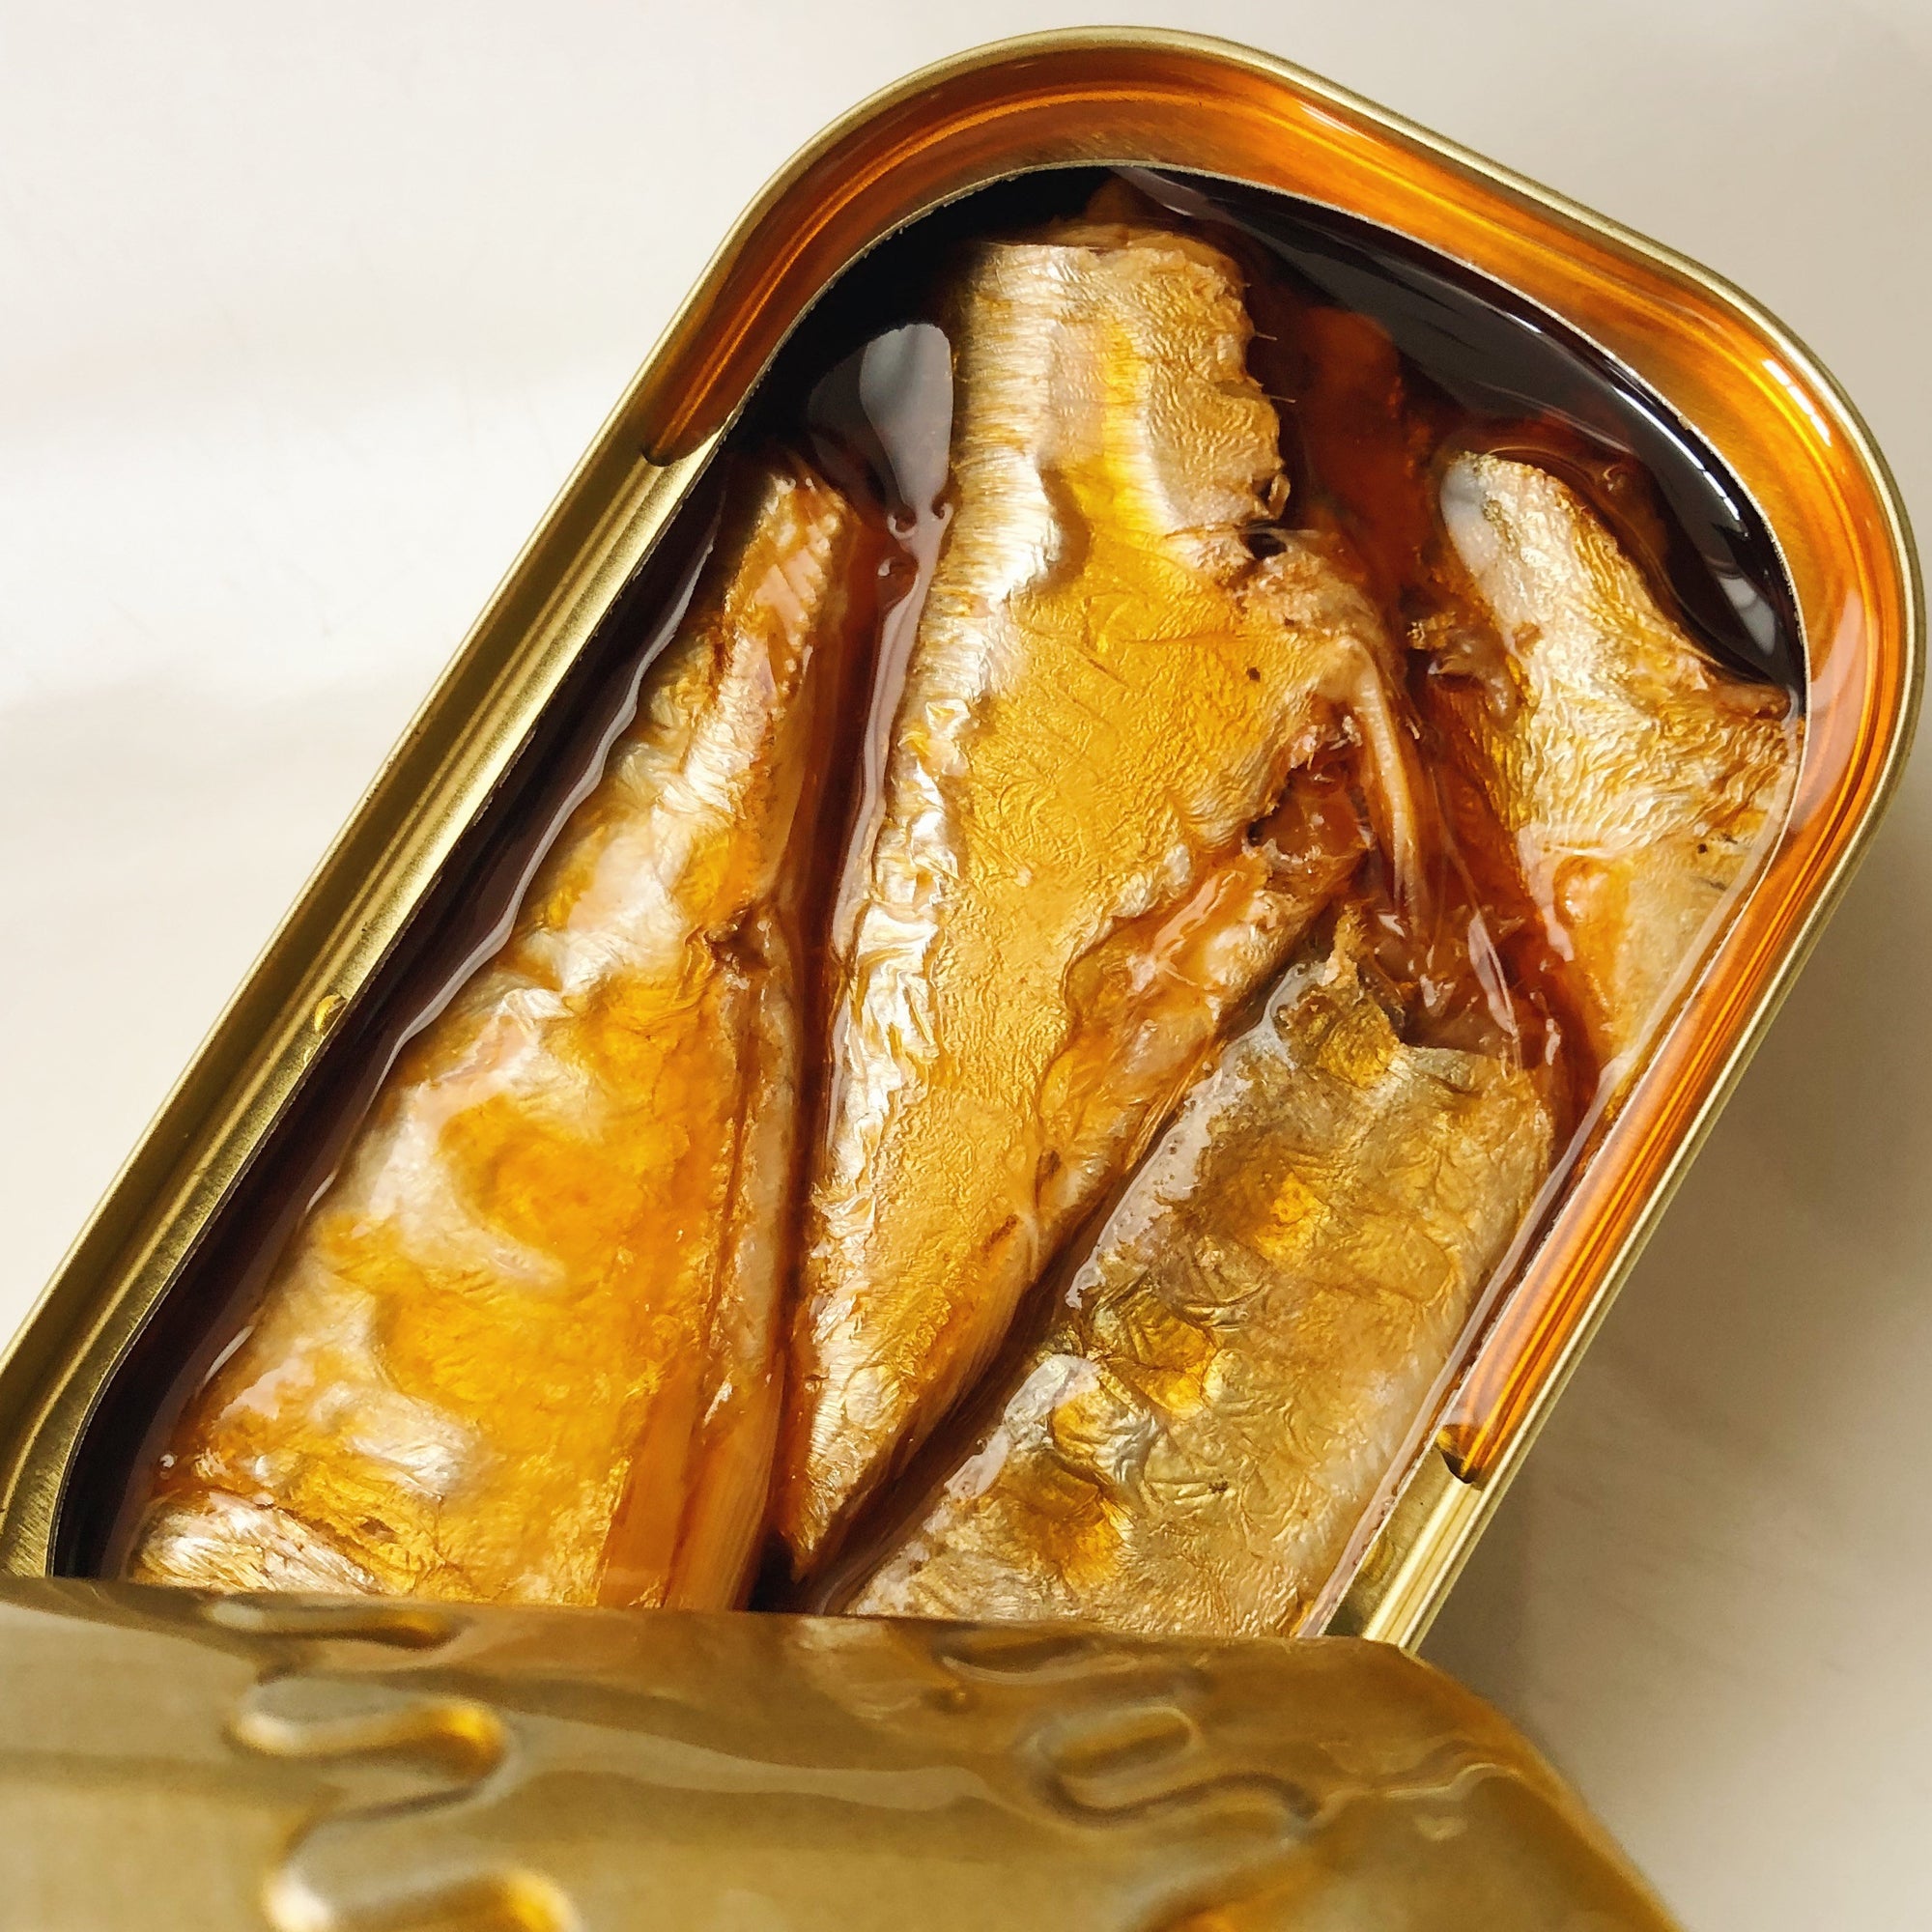 A tin of sardines in escabeche sauce - Donostia Foods